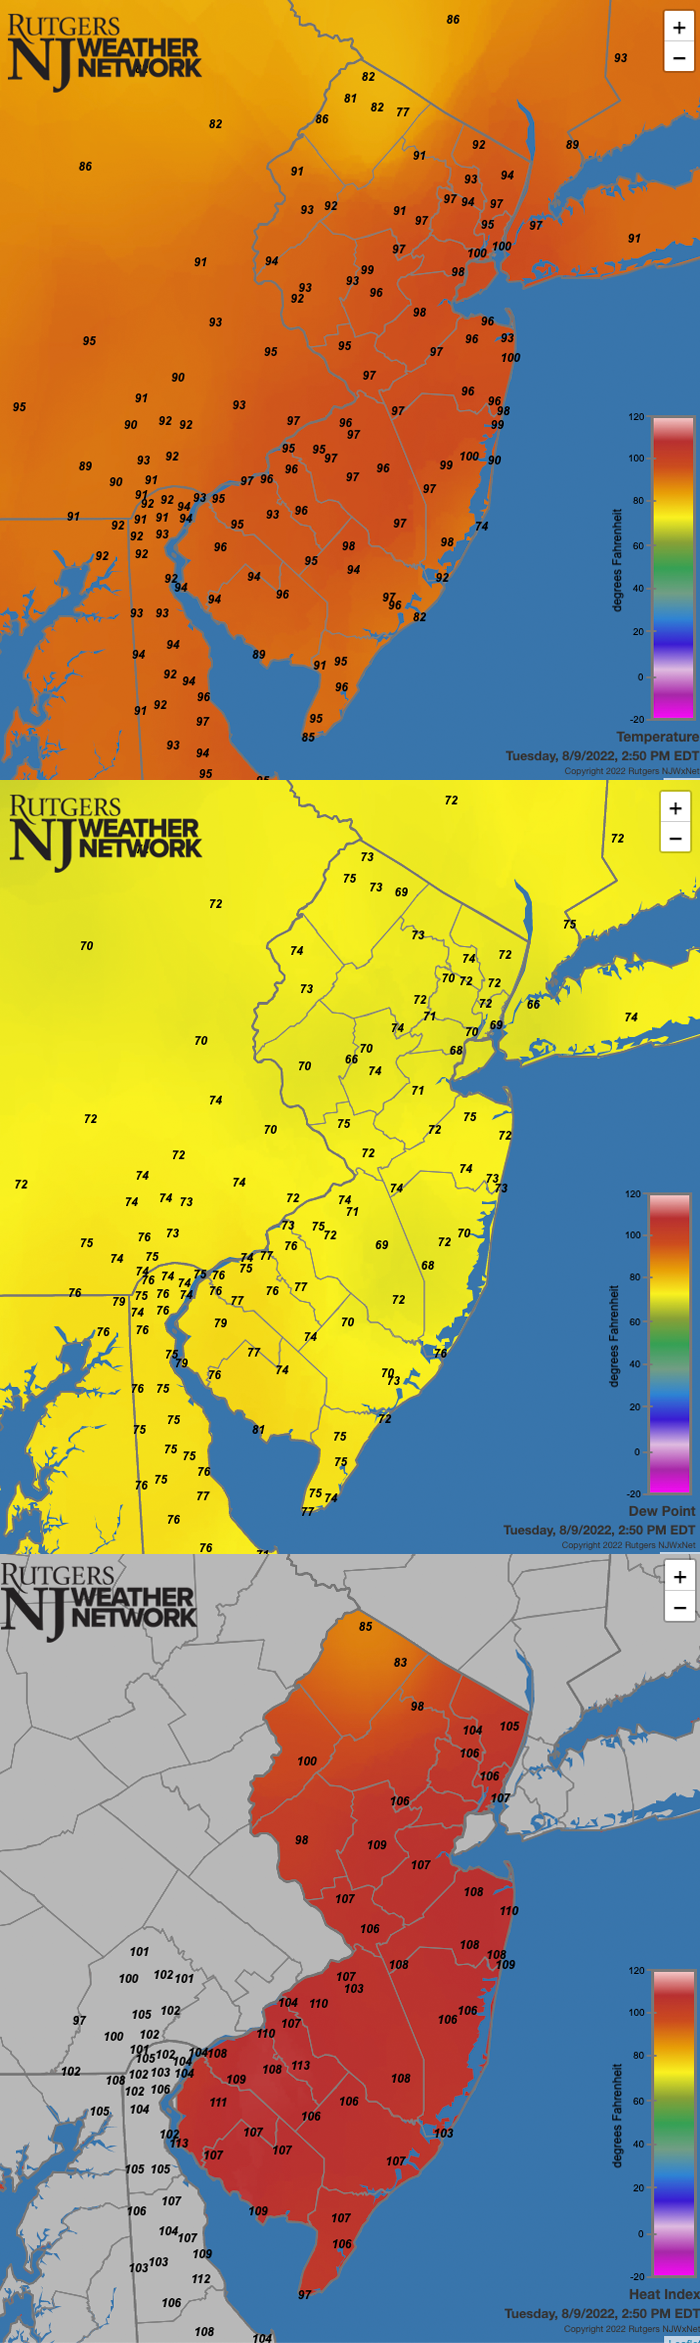 Surface air temperature (top), dew point (middle), and heat index (bottom) at 2:50 PM EDT on August 9th. Observations are from Rutgers NJ Weather Network, National Weather Service airport stations, Shrewsbury Weather Network, and Delaware Environmental Observing System Network, with the heat index calculated from the observed temperature and humidity data.